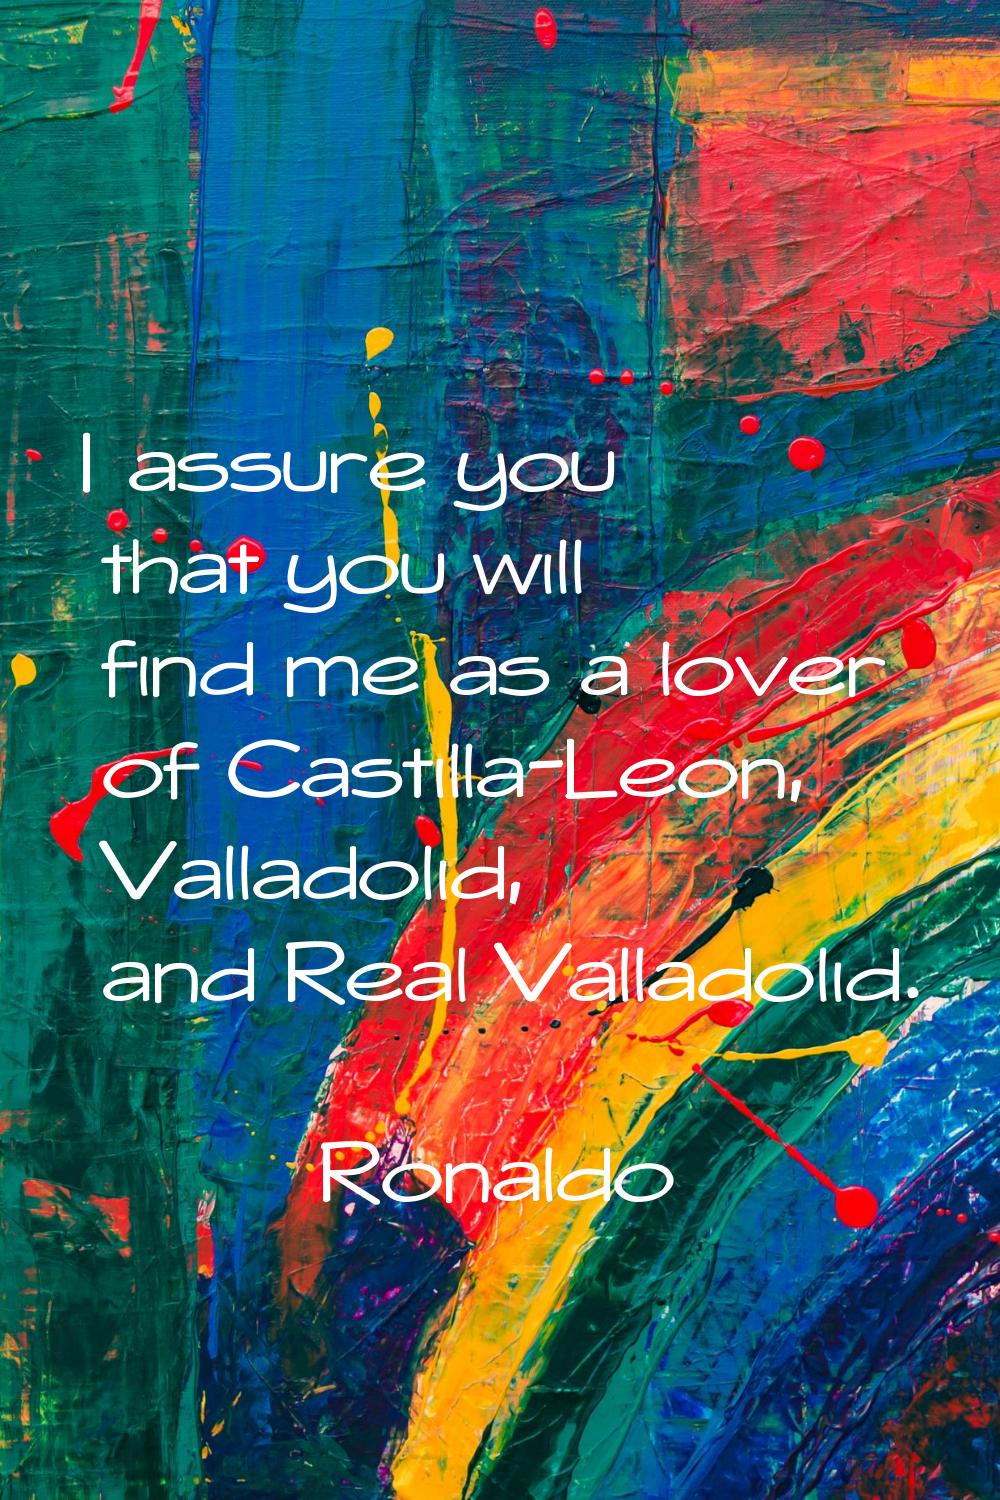 I assure you that you will find me as a lover of Castilla-Leon, Valladolid, and Real Valladolid.